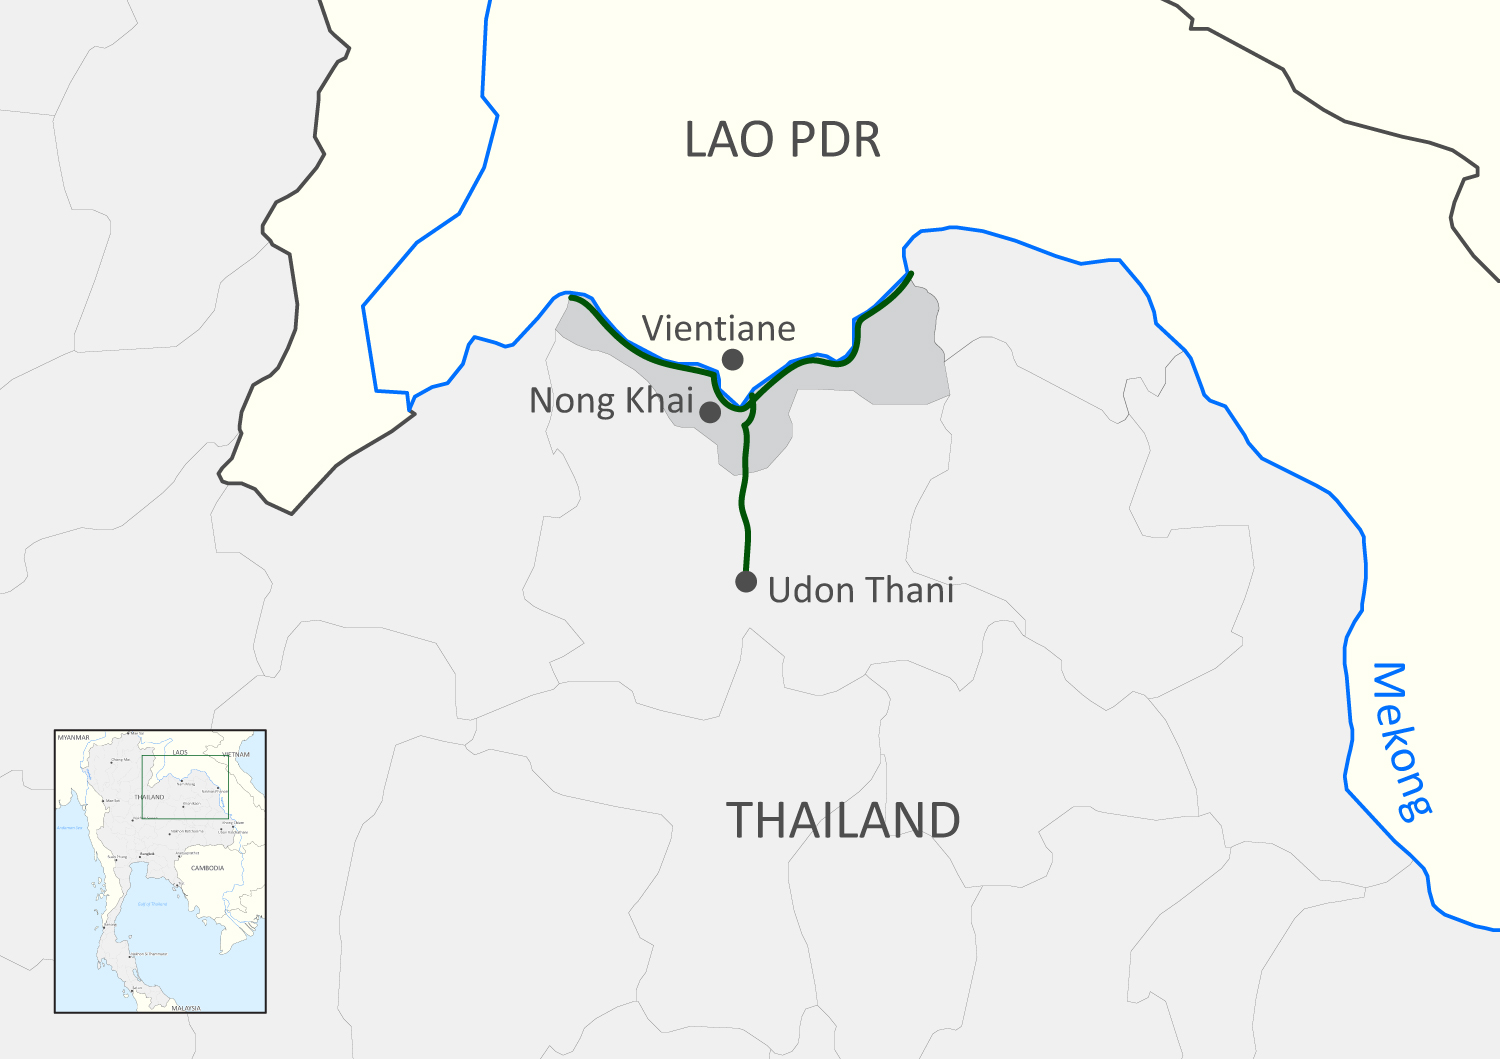 Unodc Thai Joint Mission Assesses Trafficking Along The Border With Lao Pdr